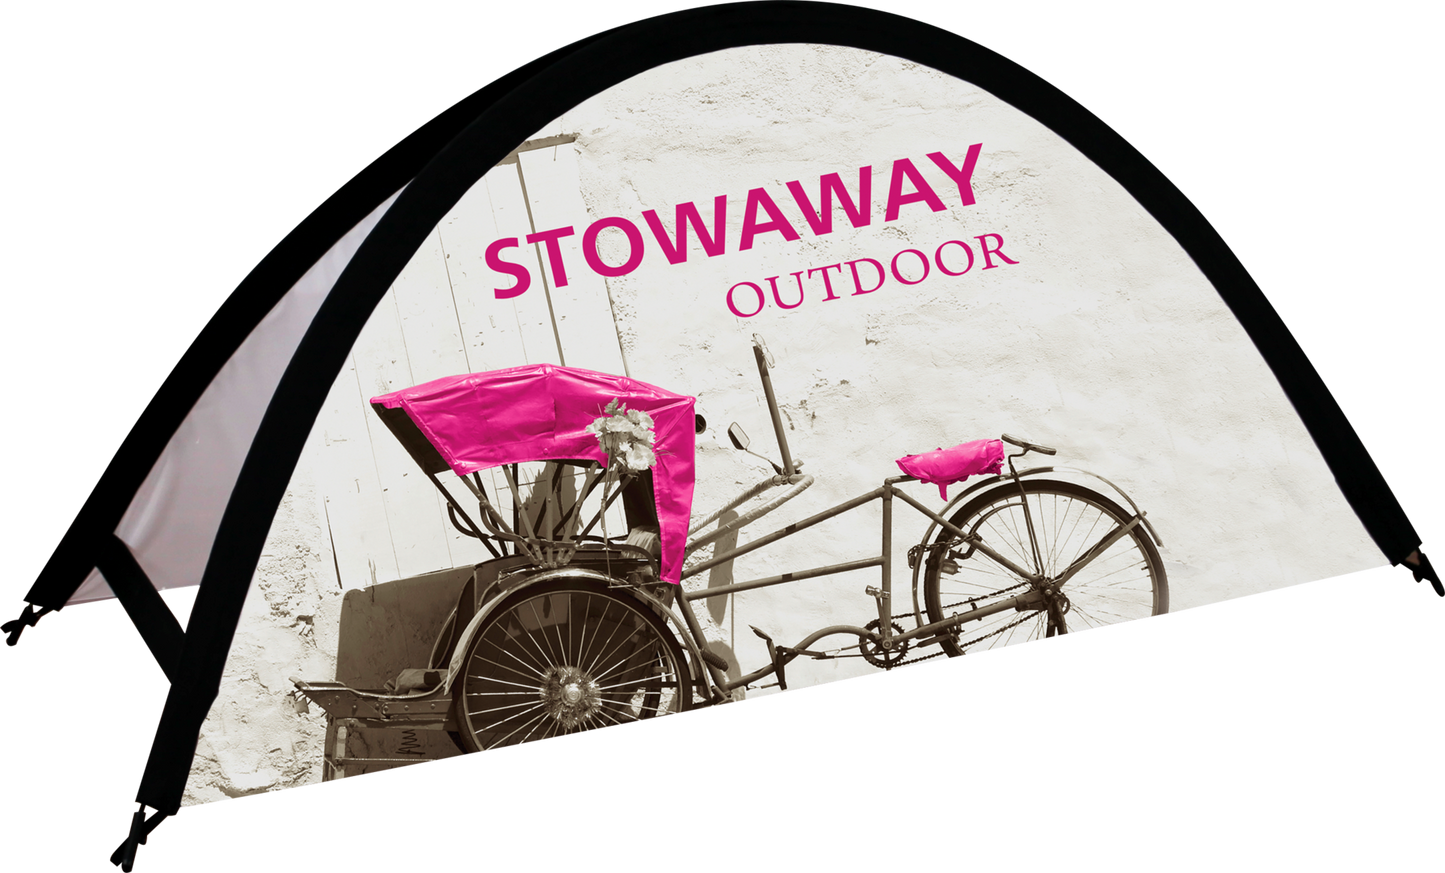 68.25in x 35.25in Stowaway 3 Small Outdoor Sign (Graphic Package)